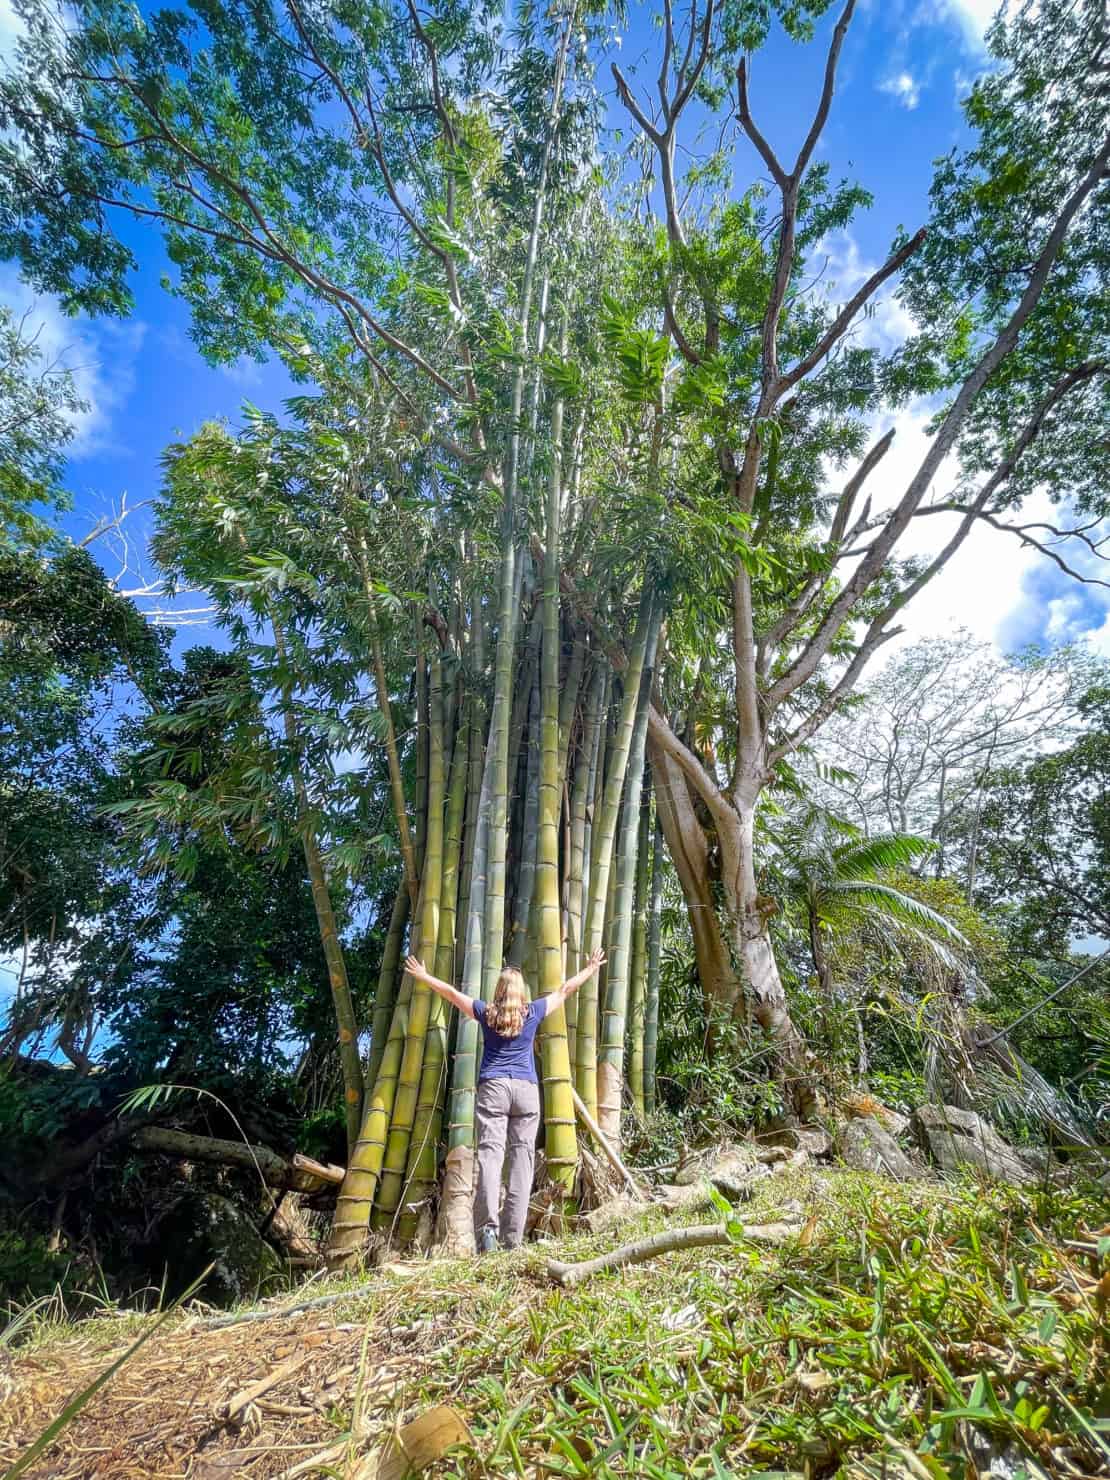 Mauritius - Bel Ombre Nature Reserve - Giant Bamboo - Abigail King hugging trees